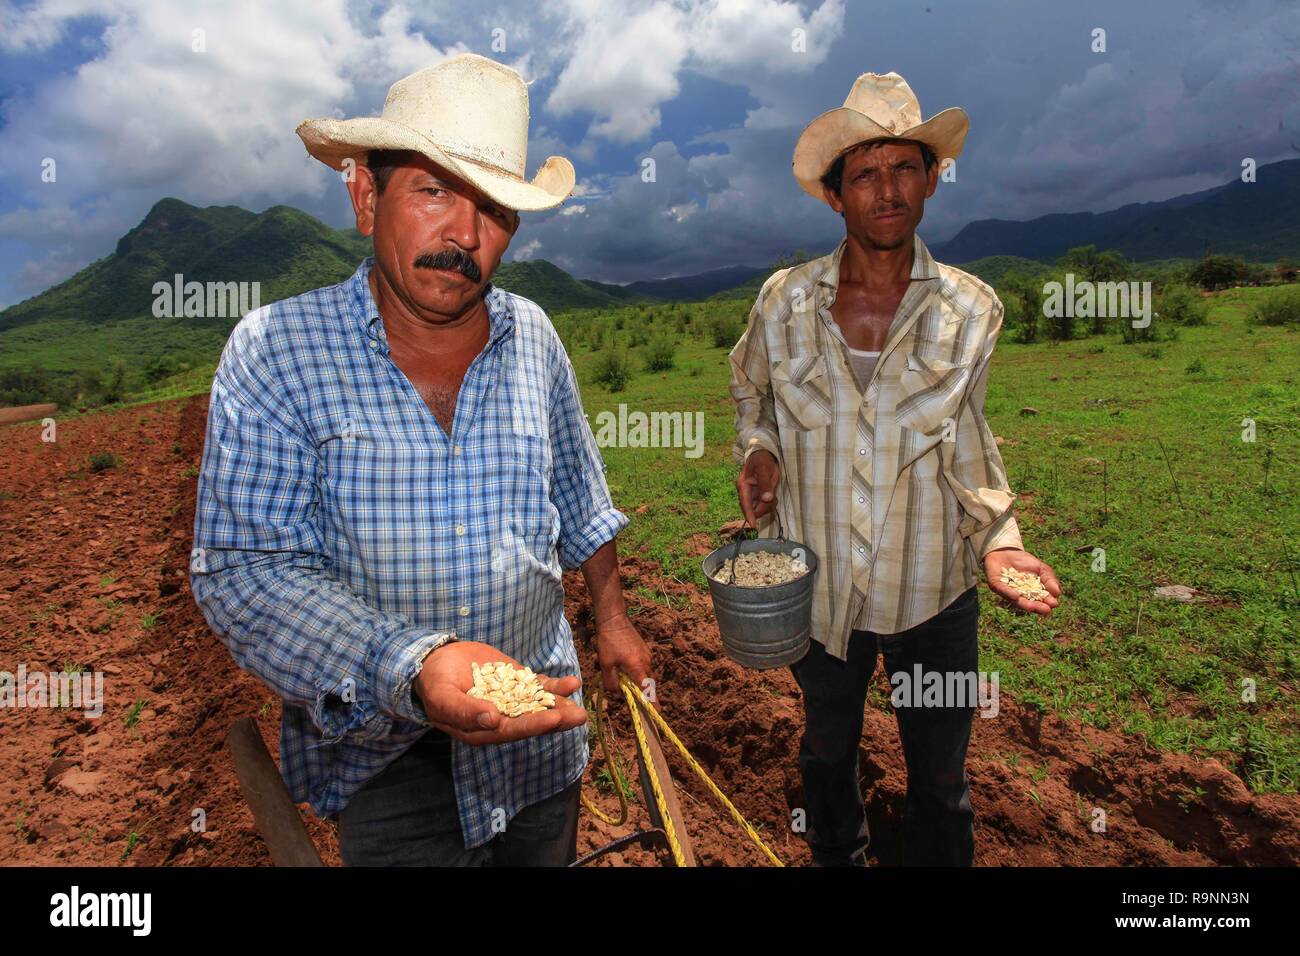 Organic corn Peasants from the community, Munihuaza in Álamos, Sonora work planting vegetables in the fields. c) a variety of organic corn species so  Stock Photo